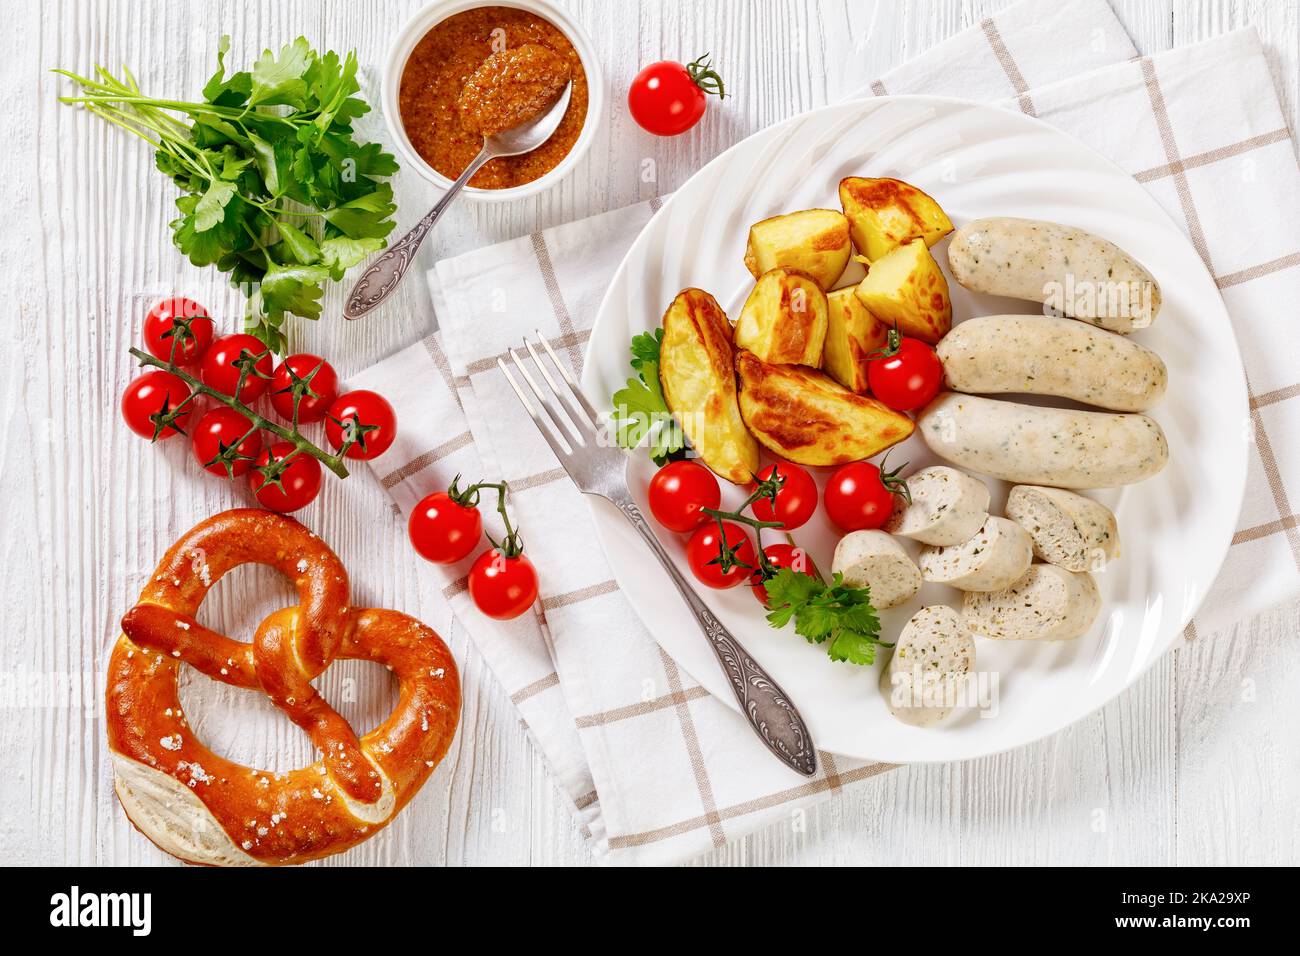 Weisswurst, bavarian white sausage of minced veal, pork back bacon, spices and parsley on white plate with roast potatoes, fresh tomatoes, pretzels, h Stock Photo